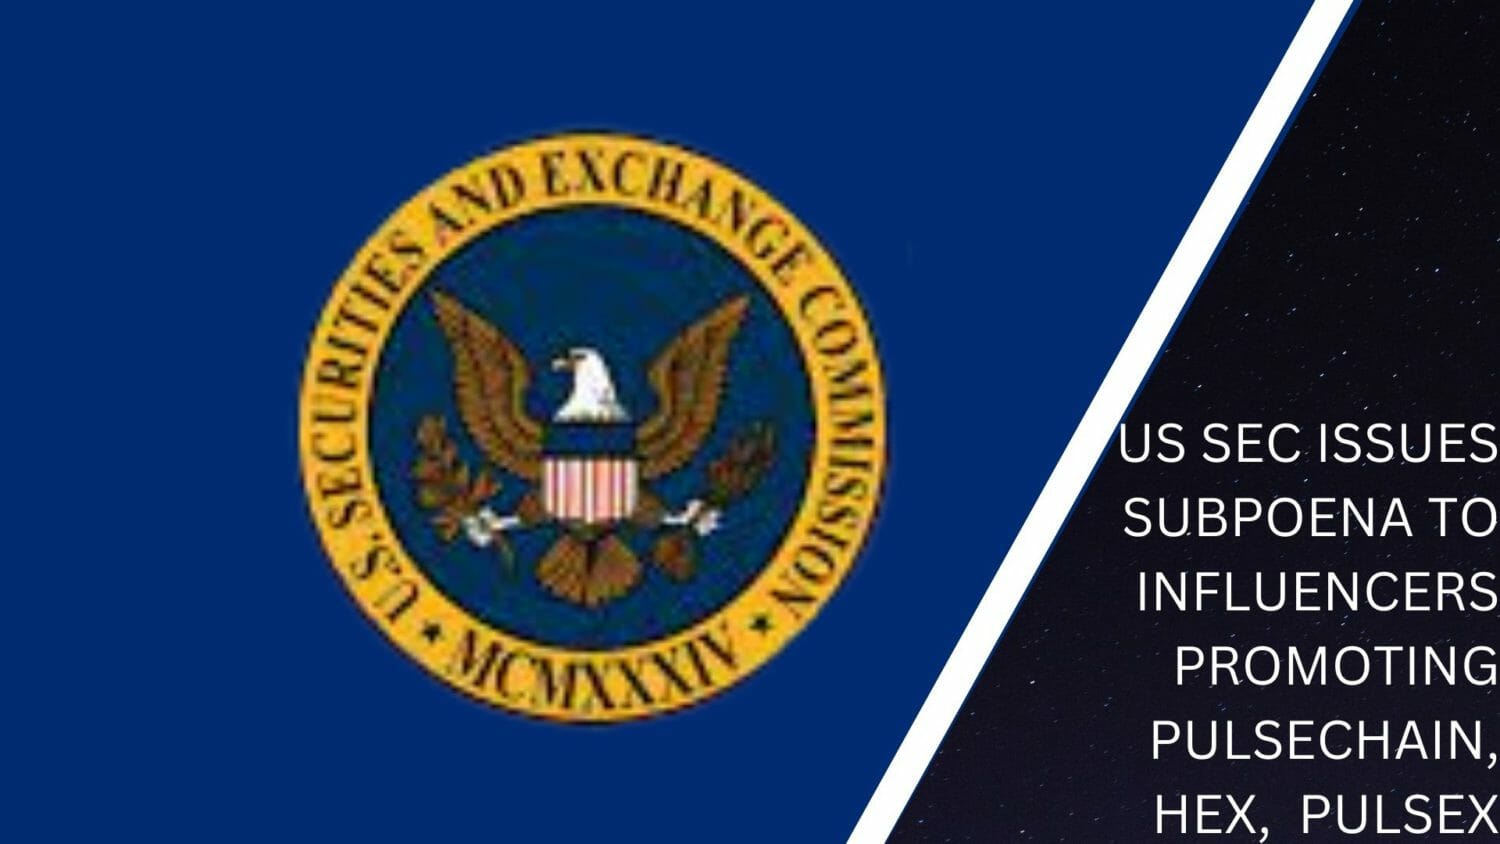 Us Sec Issues Subpoena To Crypto Influencers Promoting Pulsechain,Hex, Pulsex